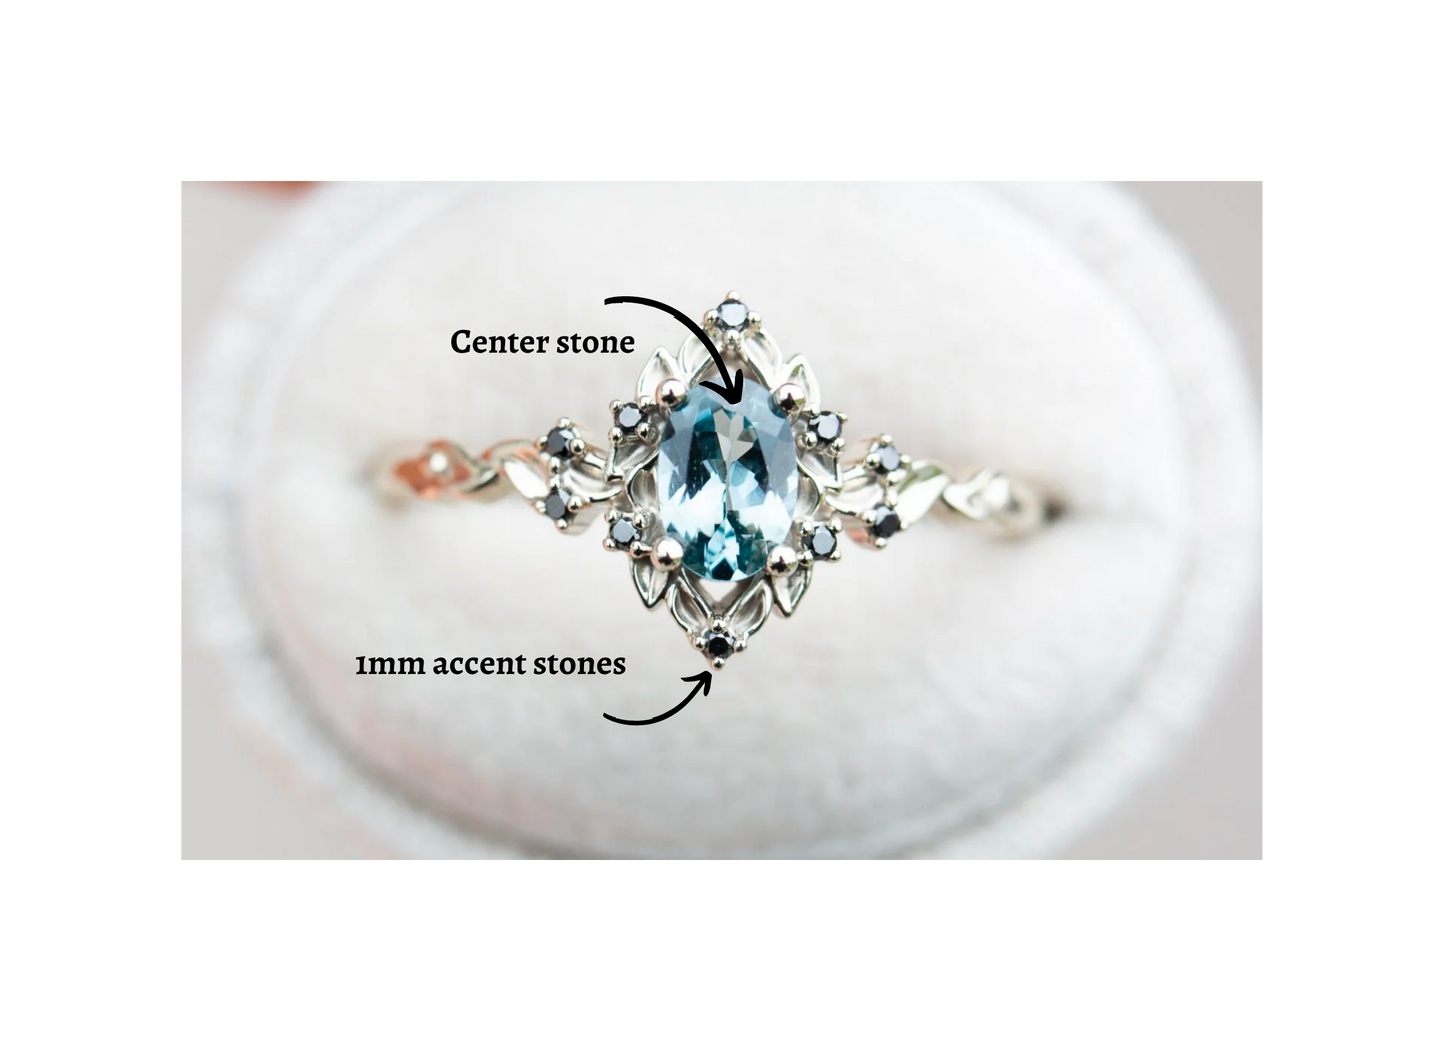 Customize your own Briar rose halo ring